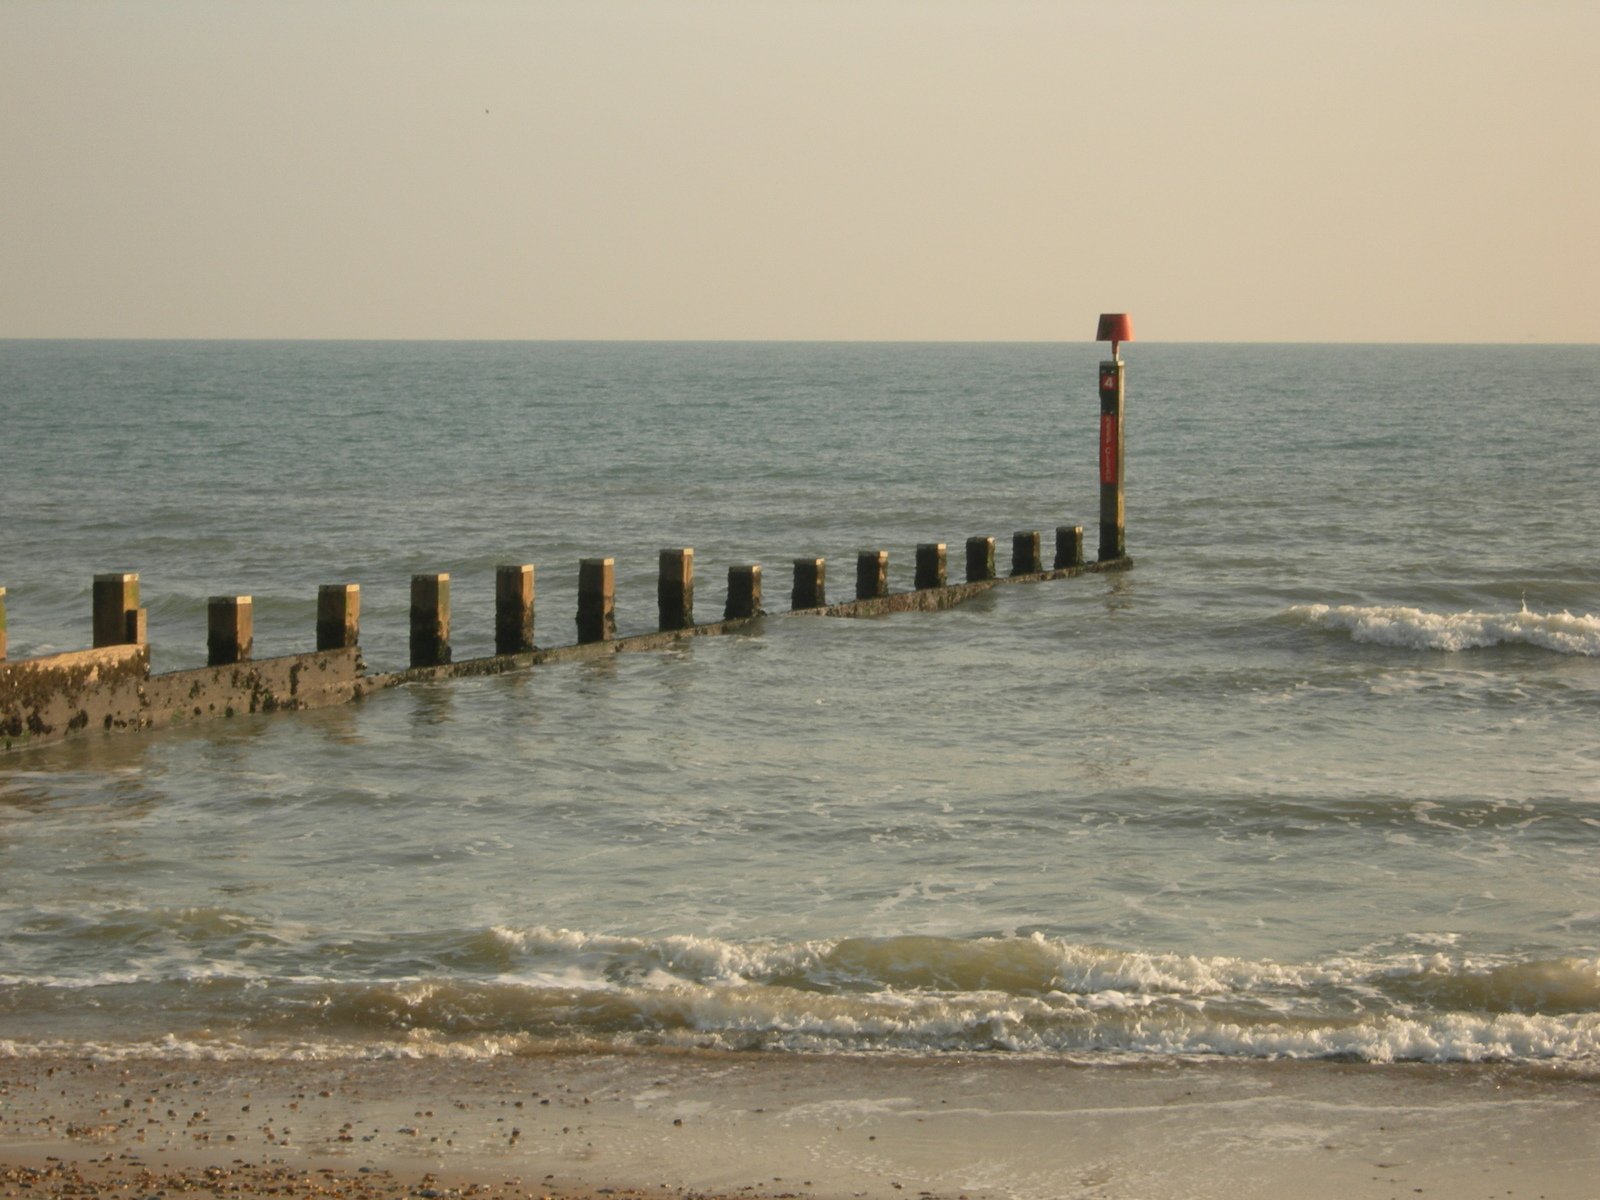 an empty pier is shown next to the beach